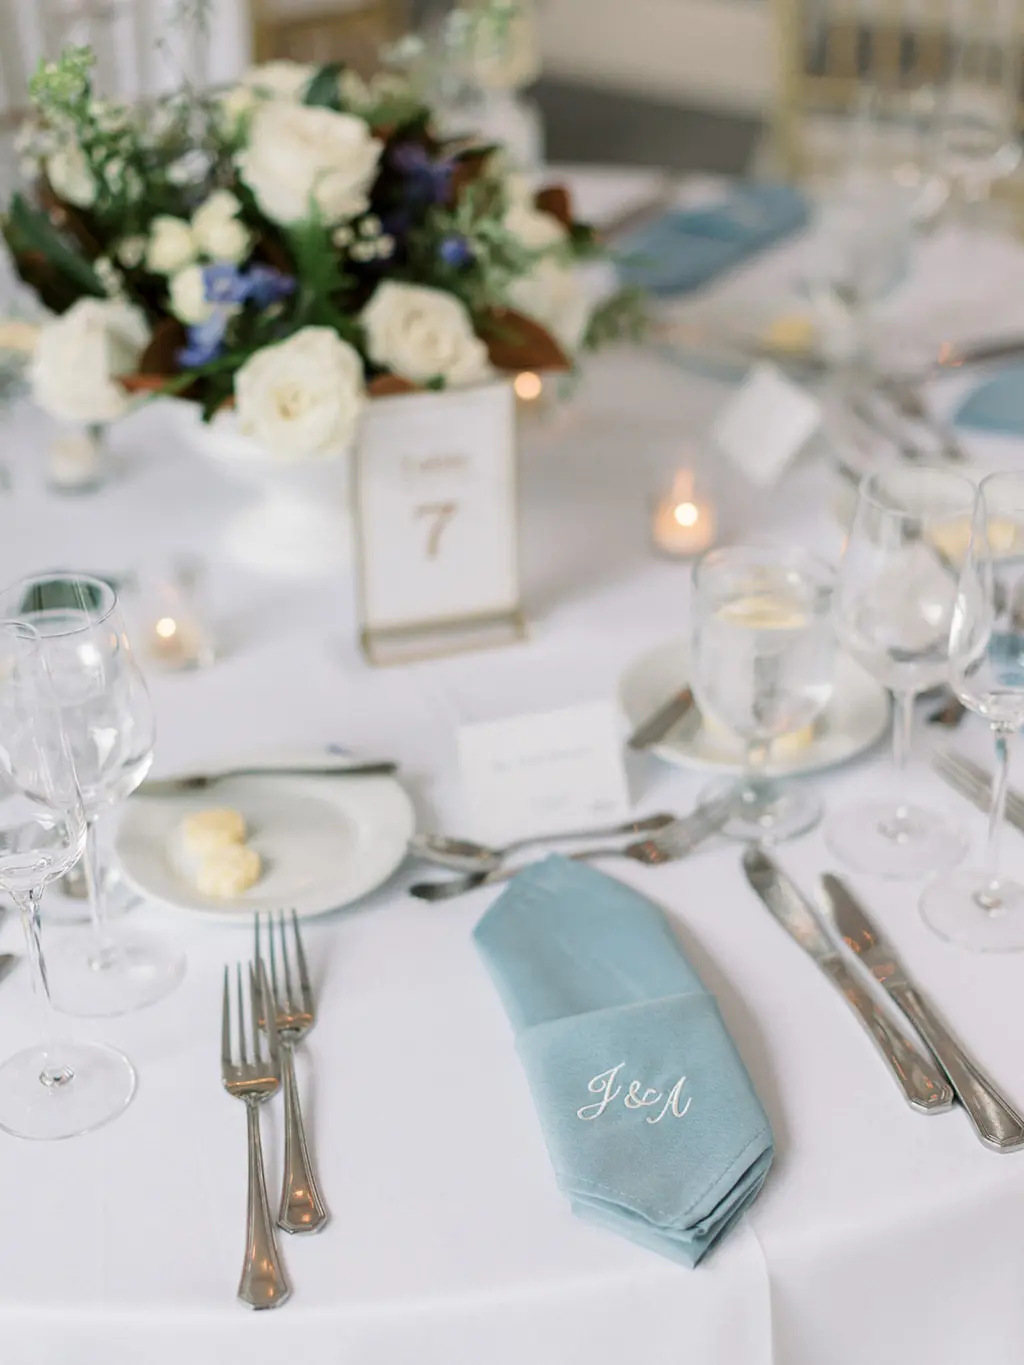 Blue Custom Embroidered Monogrammed Napkins | Classic Blue and White Wedding Reception Ideas